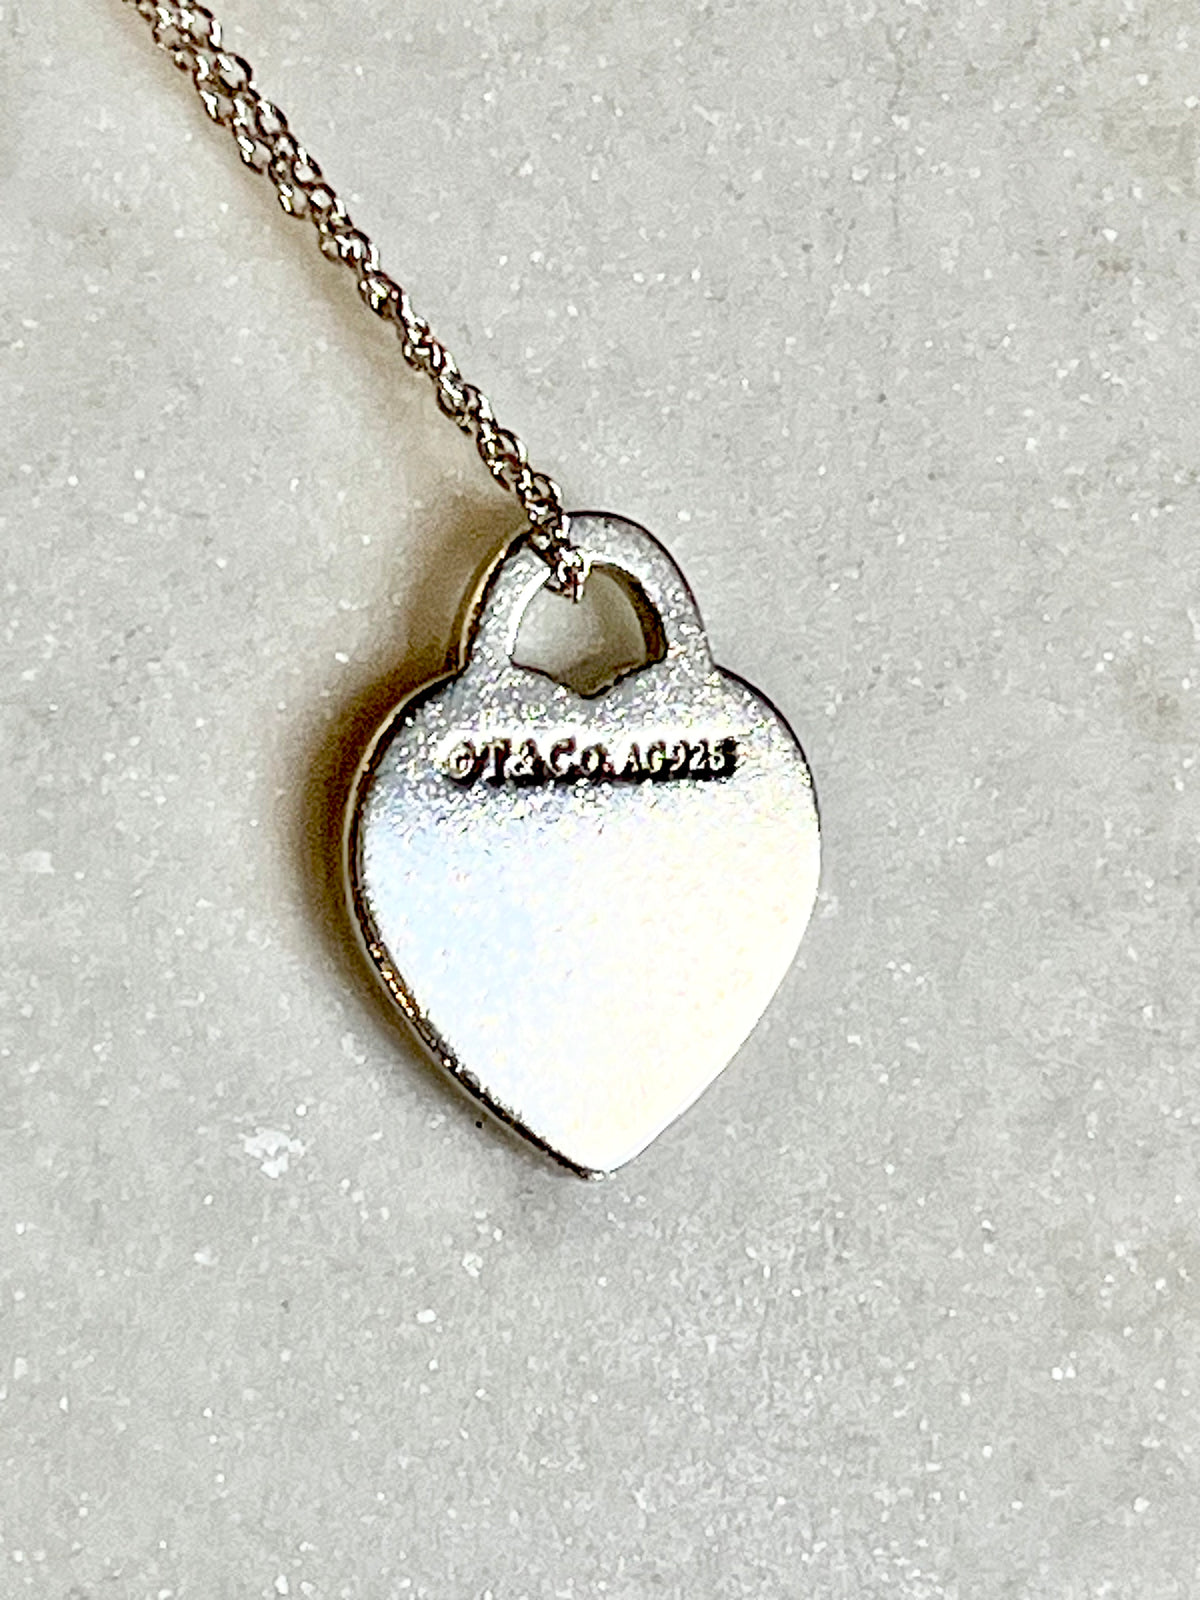 Tiffany &amp; Co. 925 Sterling Silver Small Heart Tag Necklace